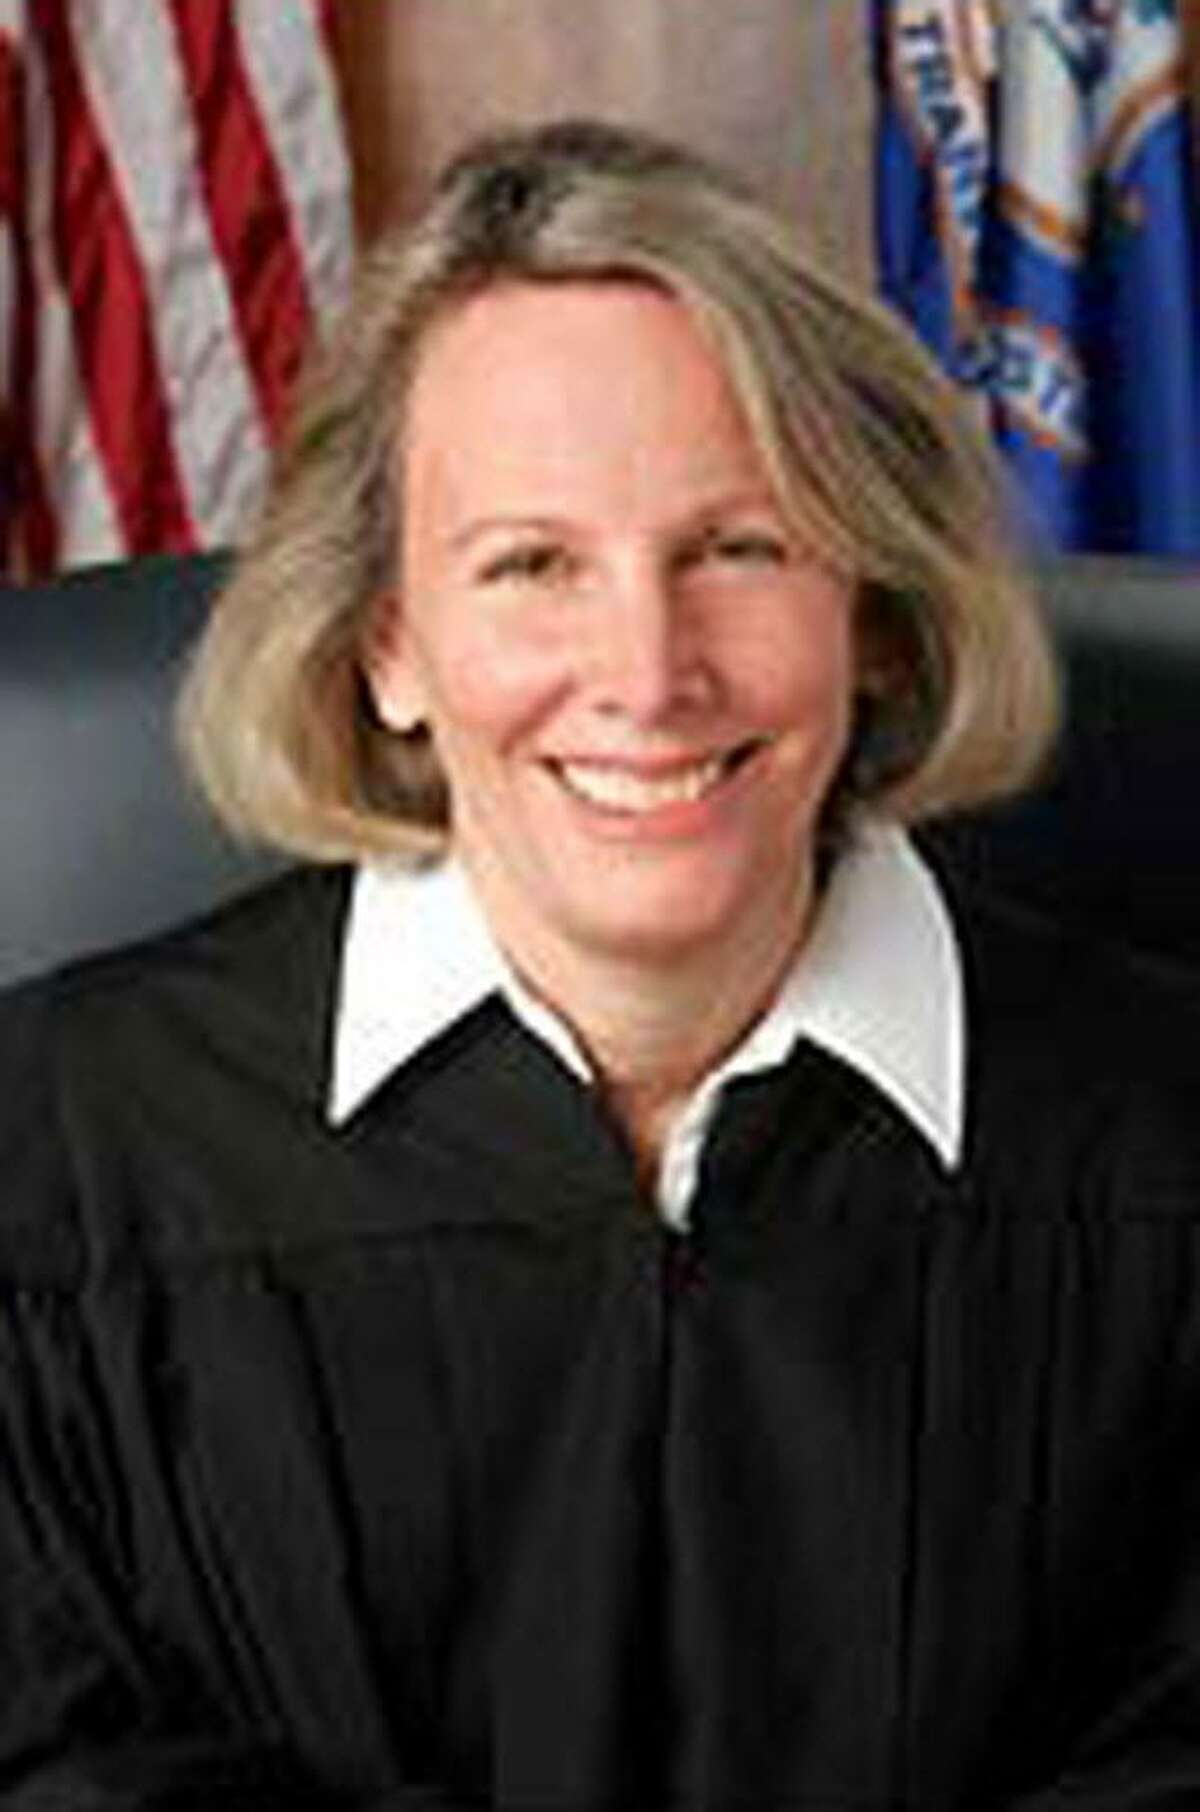 State Supreme Court reverses lower ruling on education funding